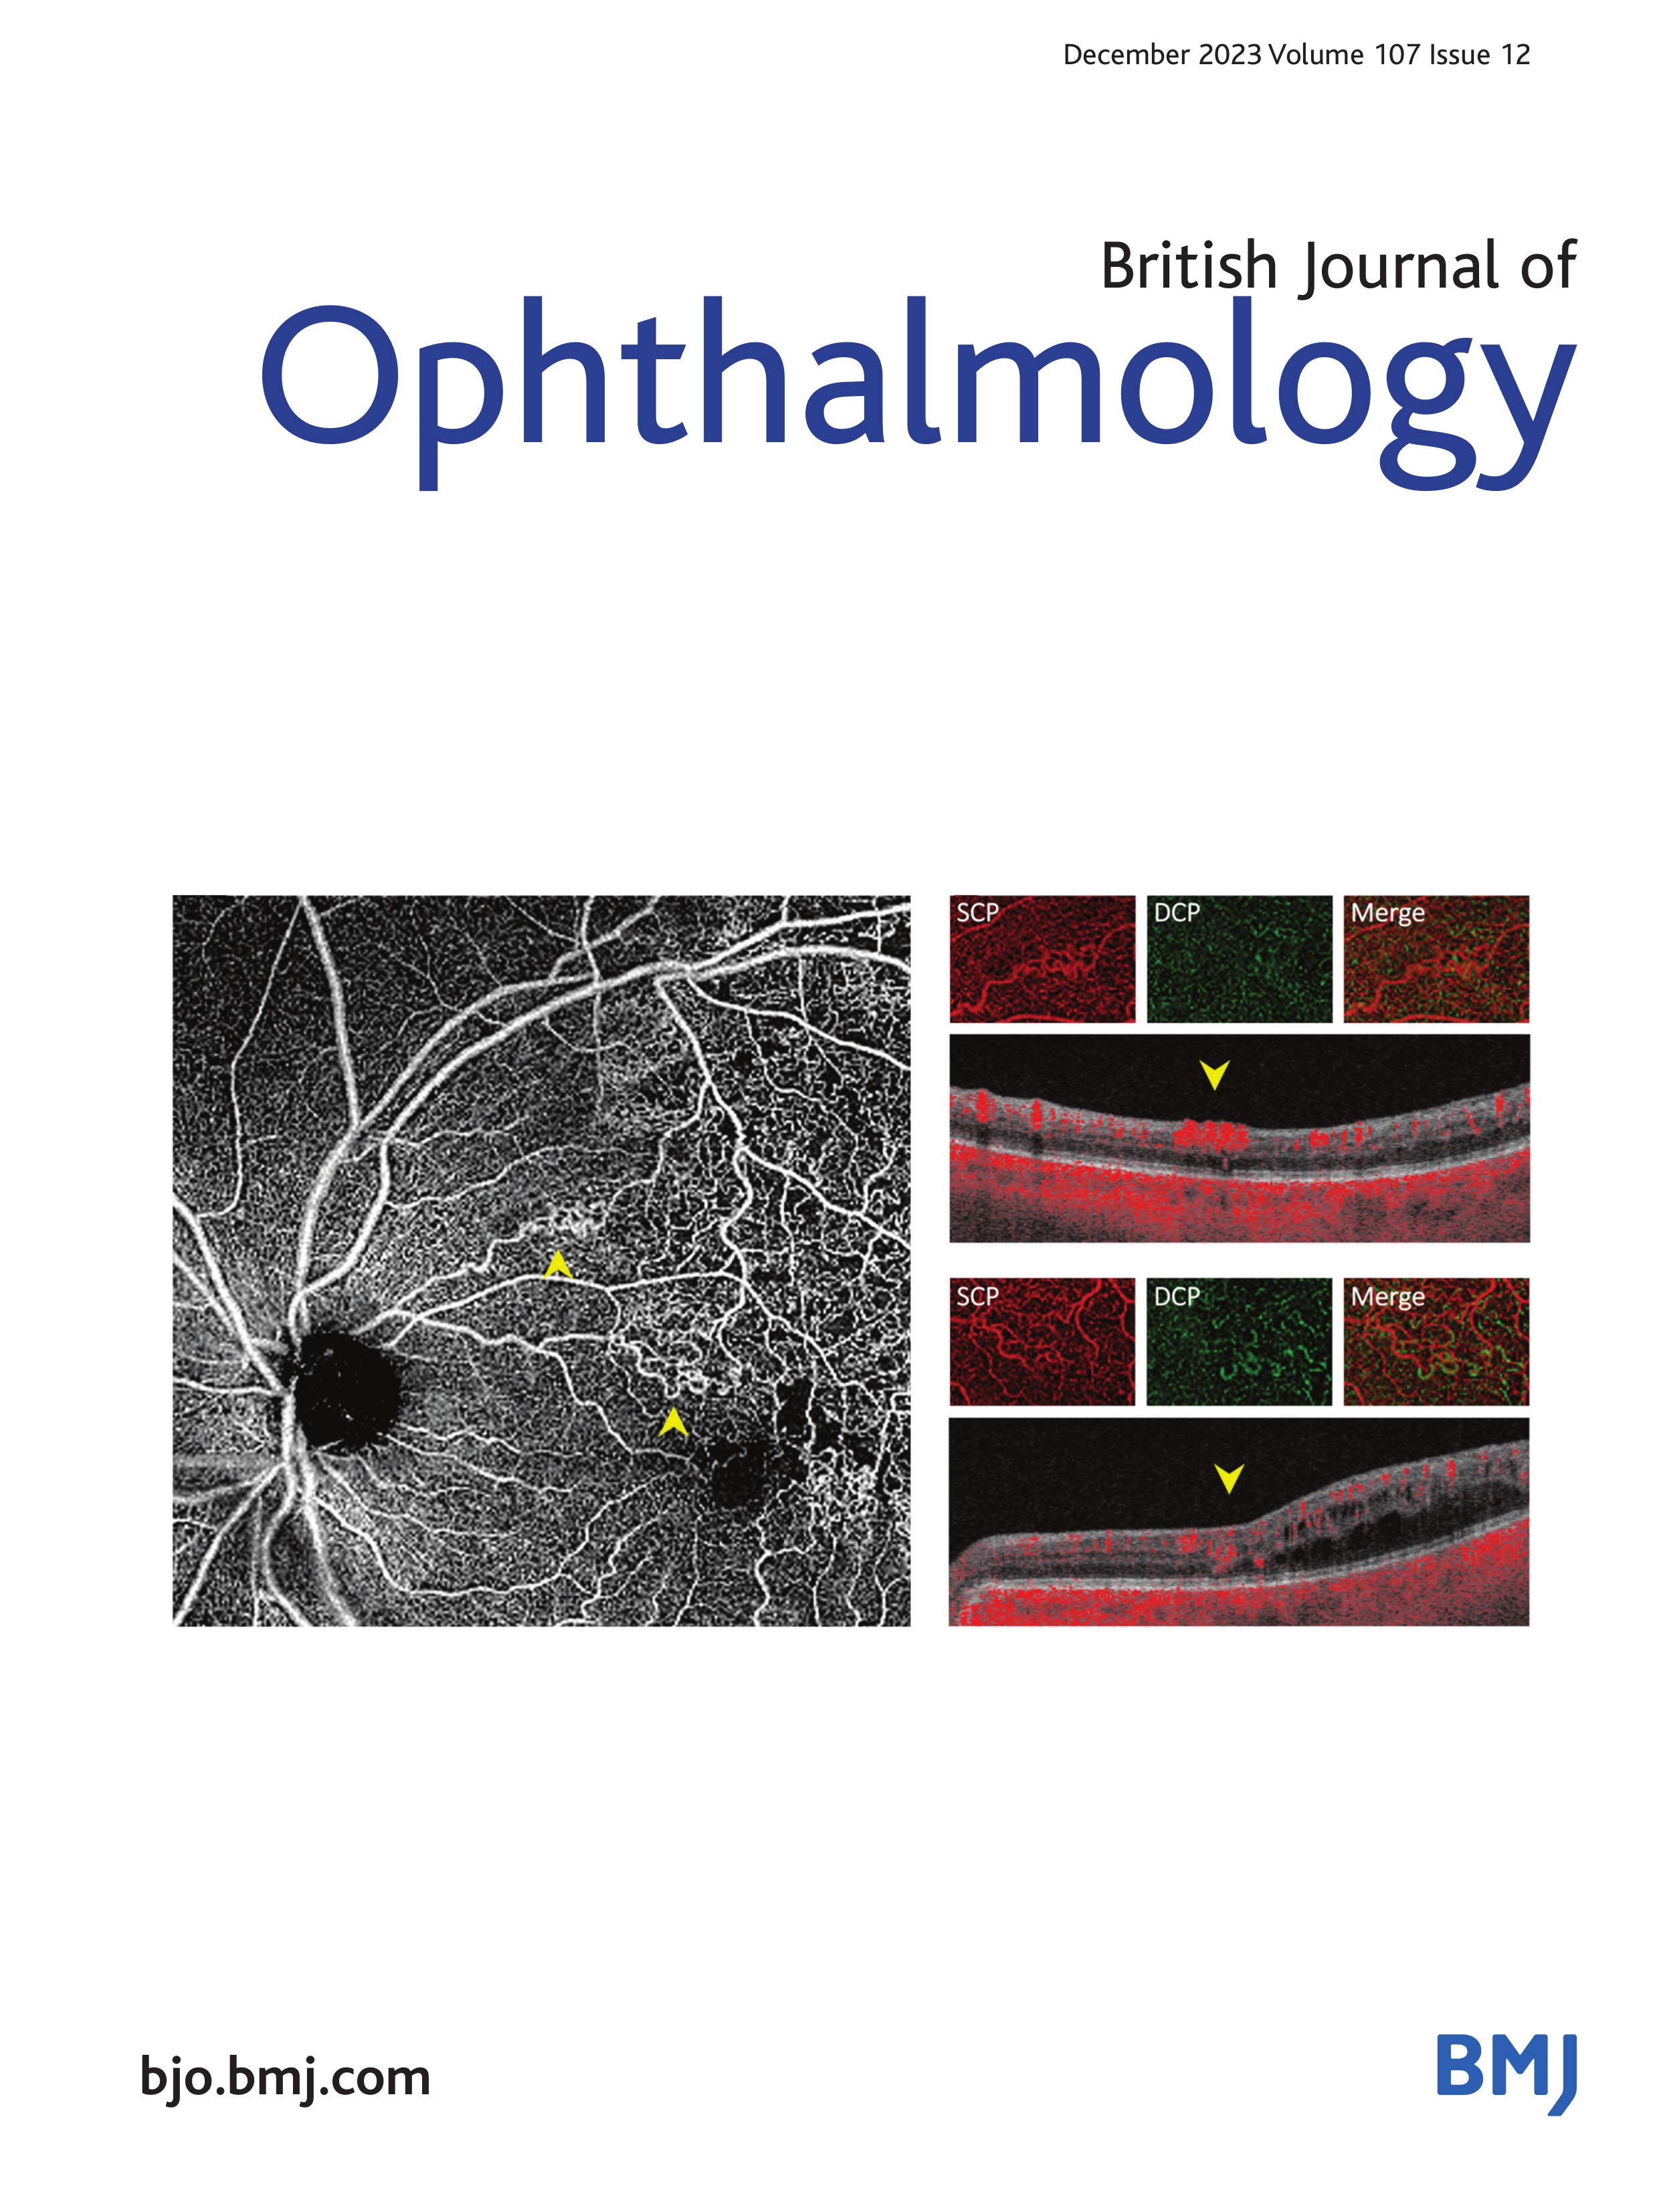 Effect of atropine, orthokeratology and combined treatments for myopia control: a 2-year stratified randomised clinical trial